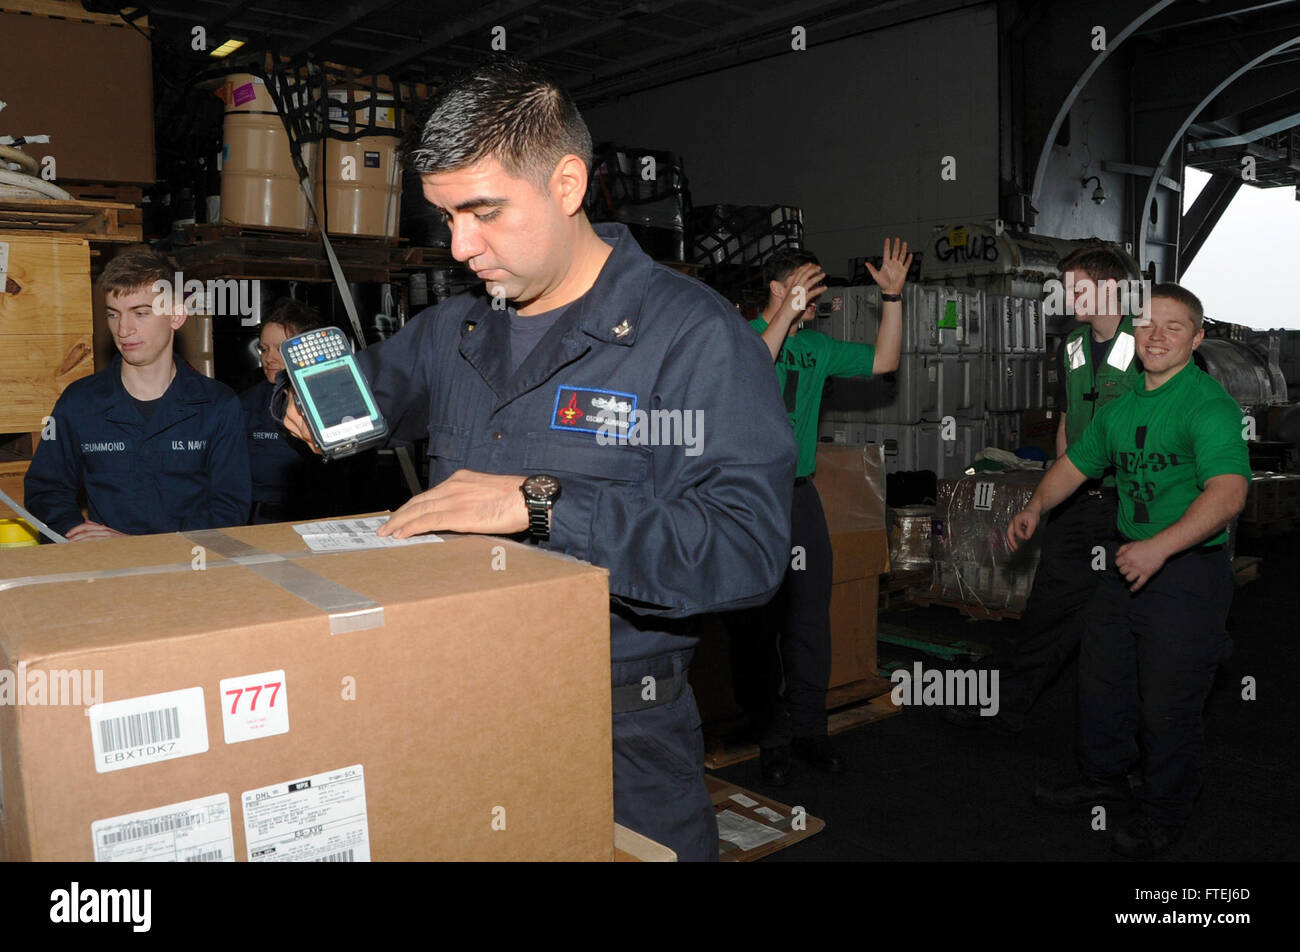 ATLANTIC OCEAN (Nov. 7, 2014) Logistics Specialist 3rd Class Oscar Alvarado, from McAllen, Texas, inventories supplies after a replenishment at sea aboard the aircraft carrier USS George H.W. Bush (CVN 77). George H.W. Bush, homeported in Norfolk, Va., is conducting naval operations in the U.S. 6th Fleet area of operations in support of U.S. national security interests in Europe. Stock Photo